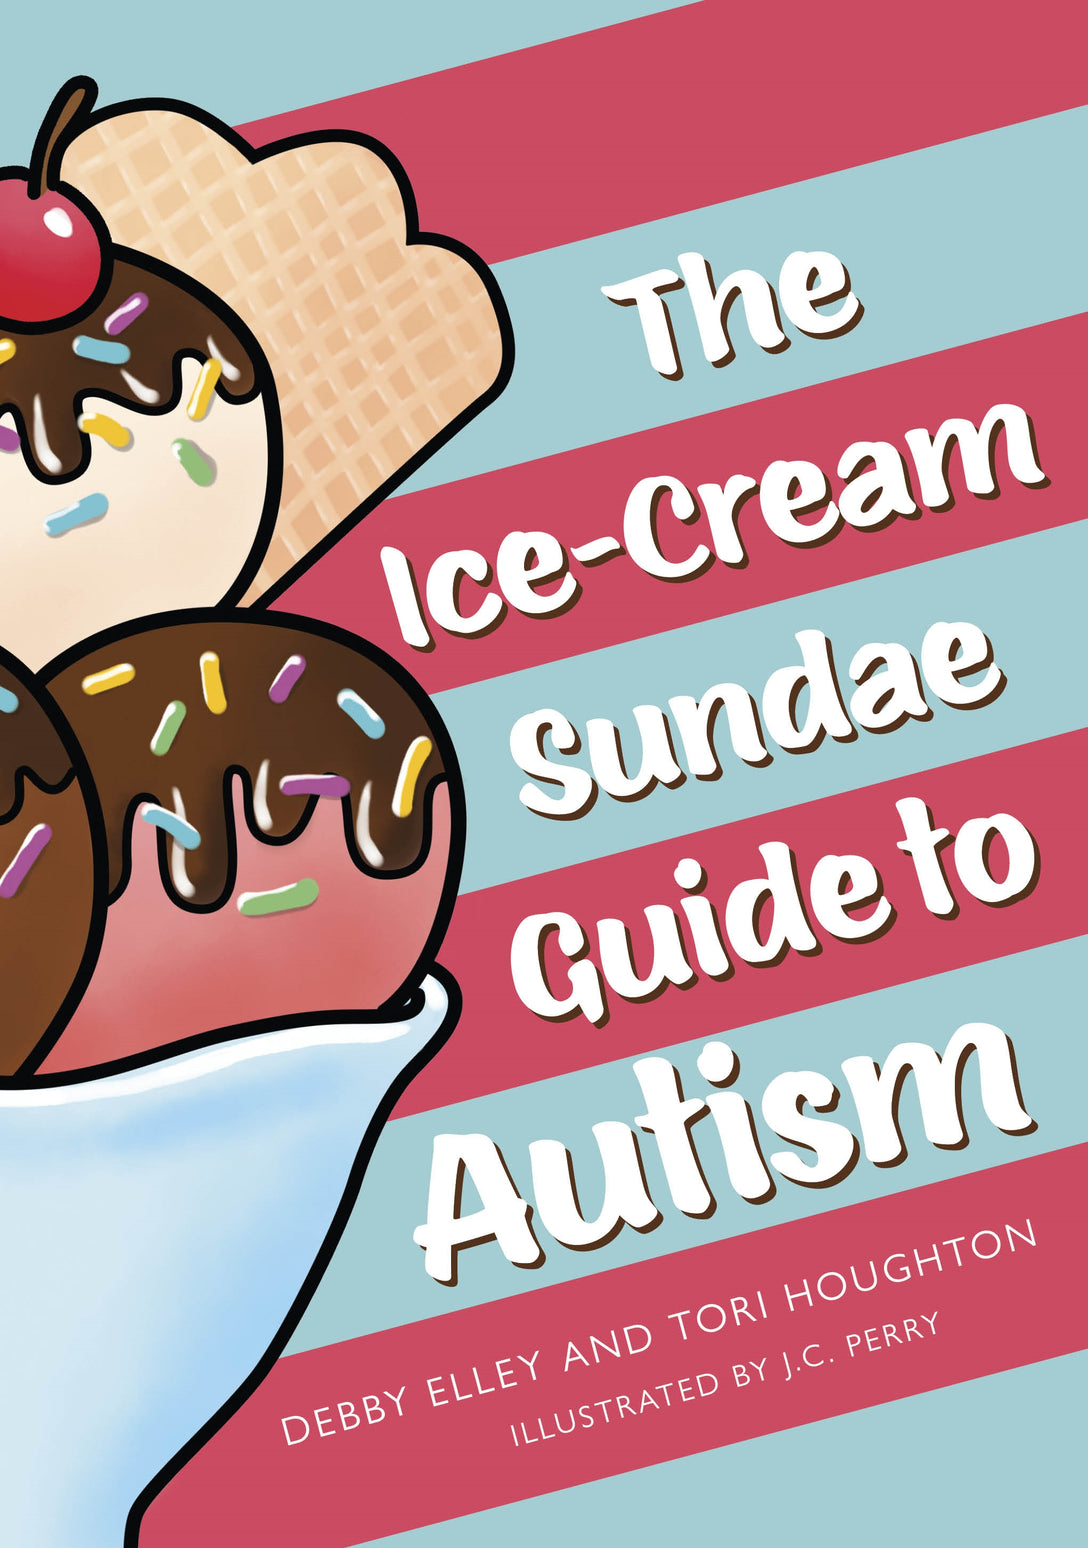 The Ice-Cream Sundae Guide to Autism by Debby Elley, Tori Houghton, J.C. Perry